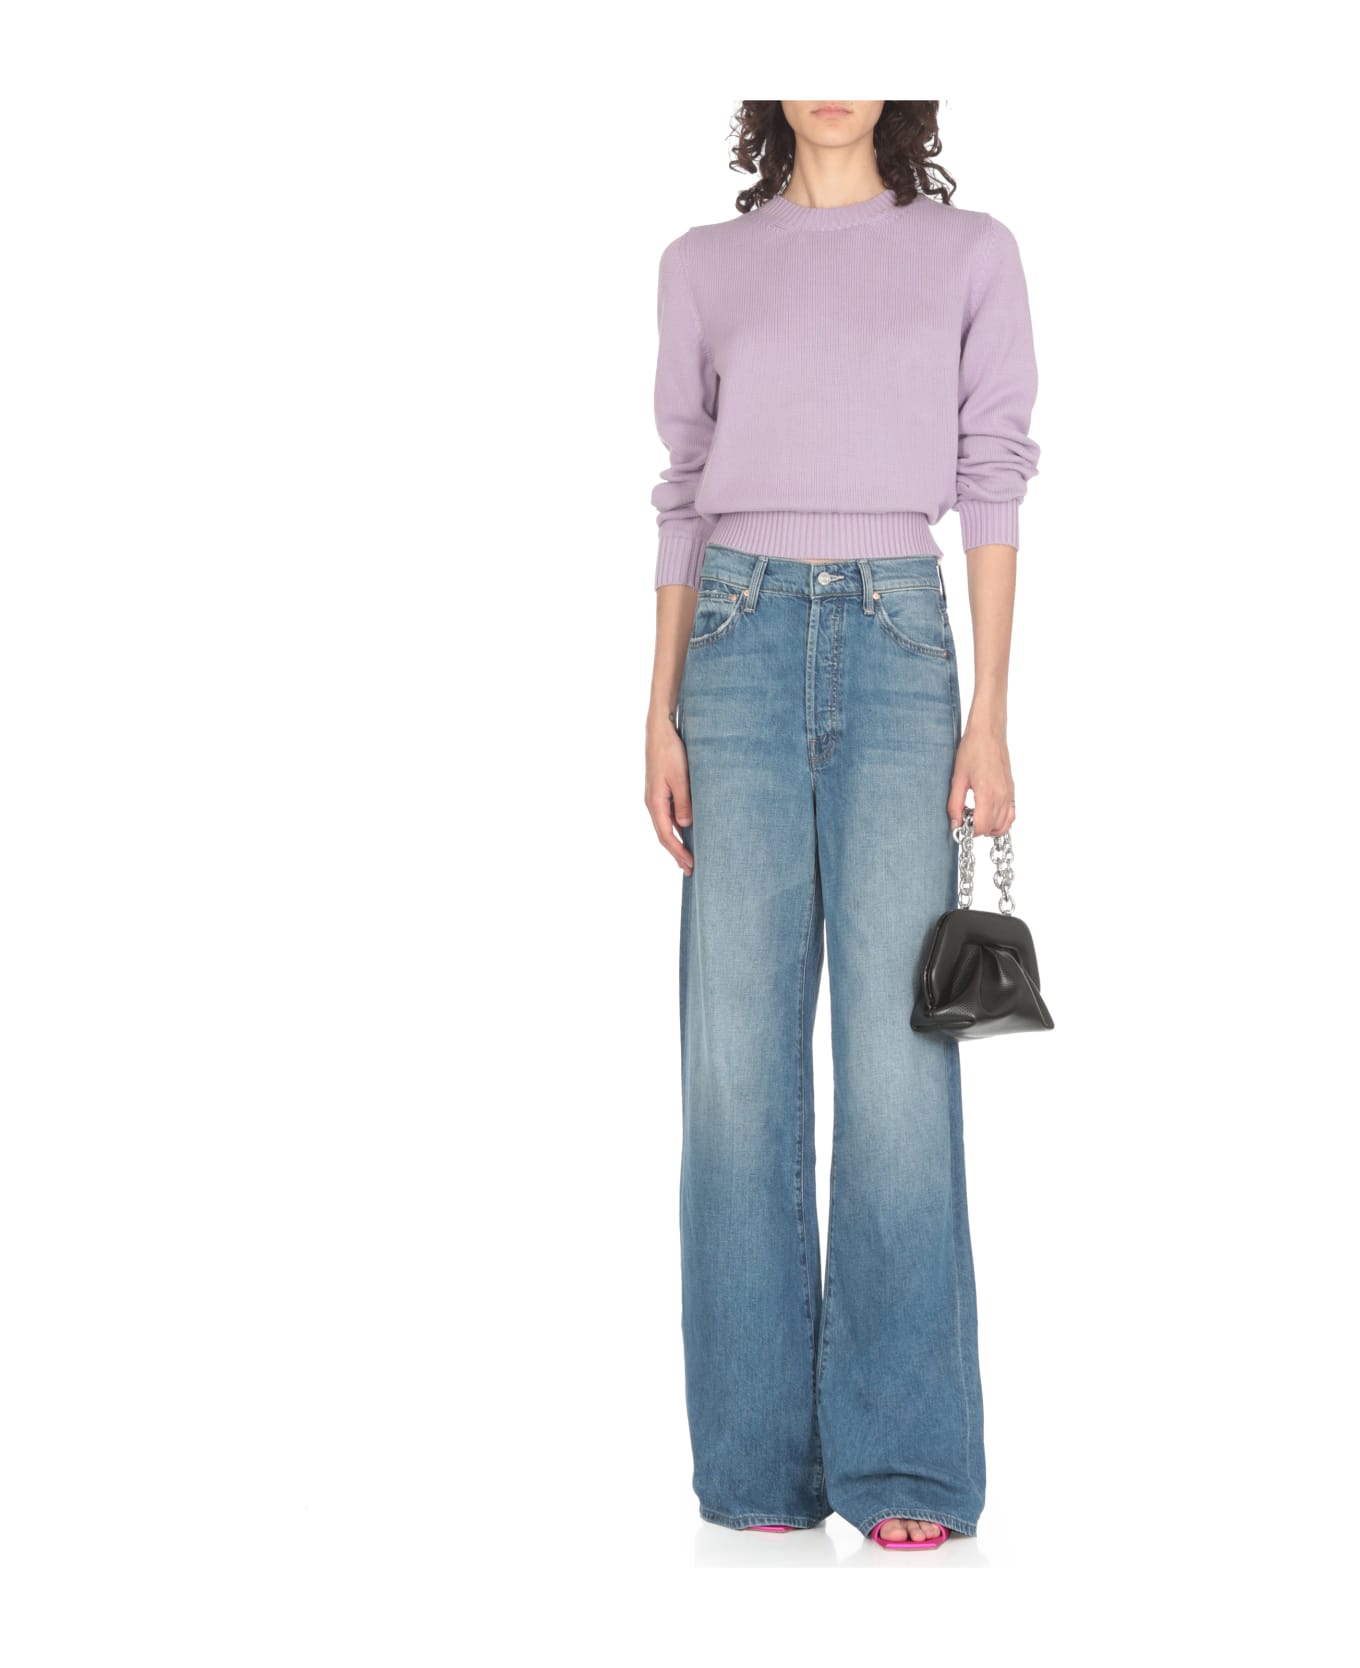 Mother The Ditcher Roller Sneak Jeans - Blue デニム